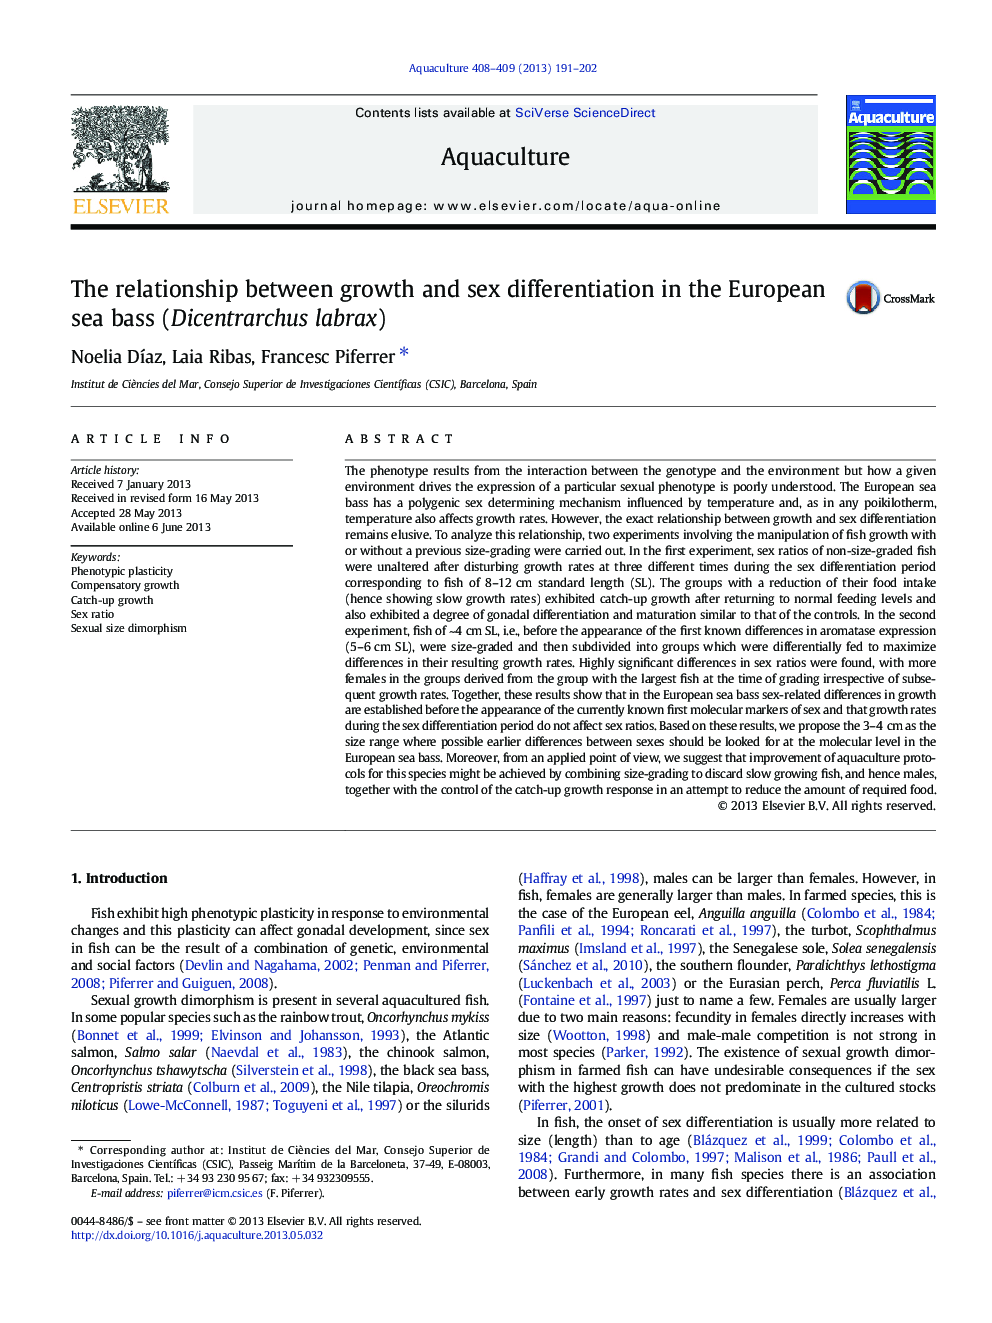 The relationship between growth and sex differentiation in the European sea bass (Dicentrarchus labrax)